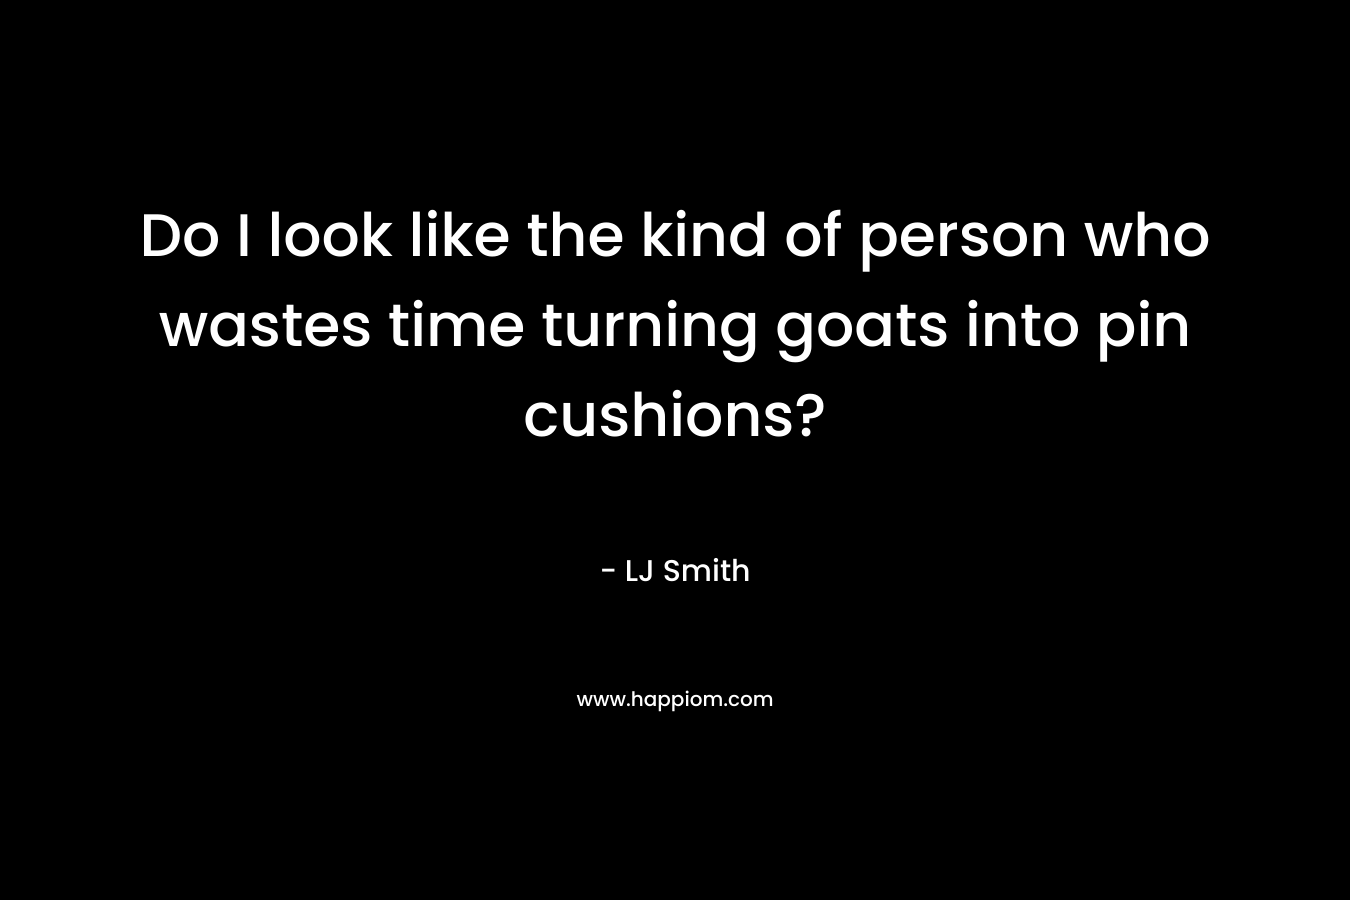 Do I look like the kind of person who wastes time turning goats into pin cushions? – LJ Smith